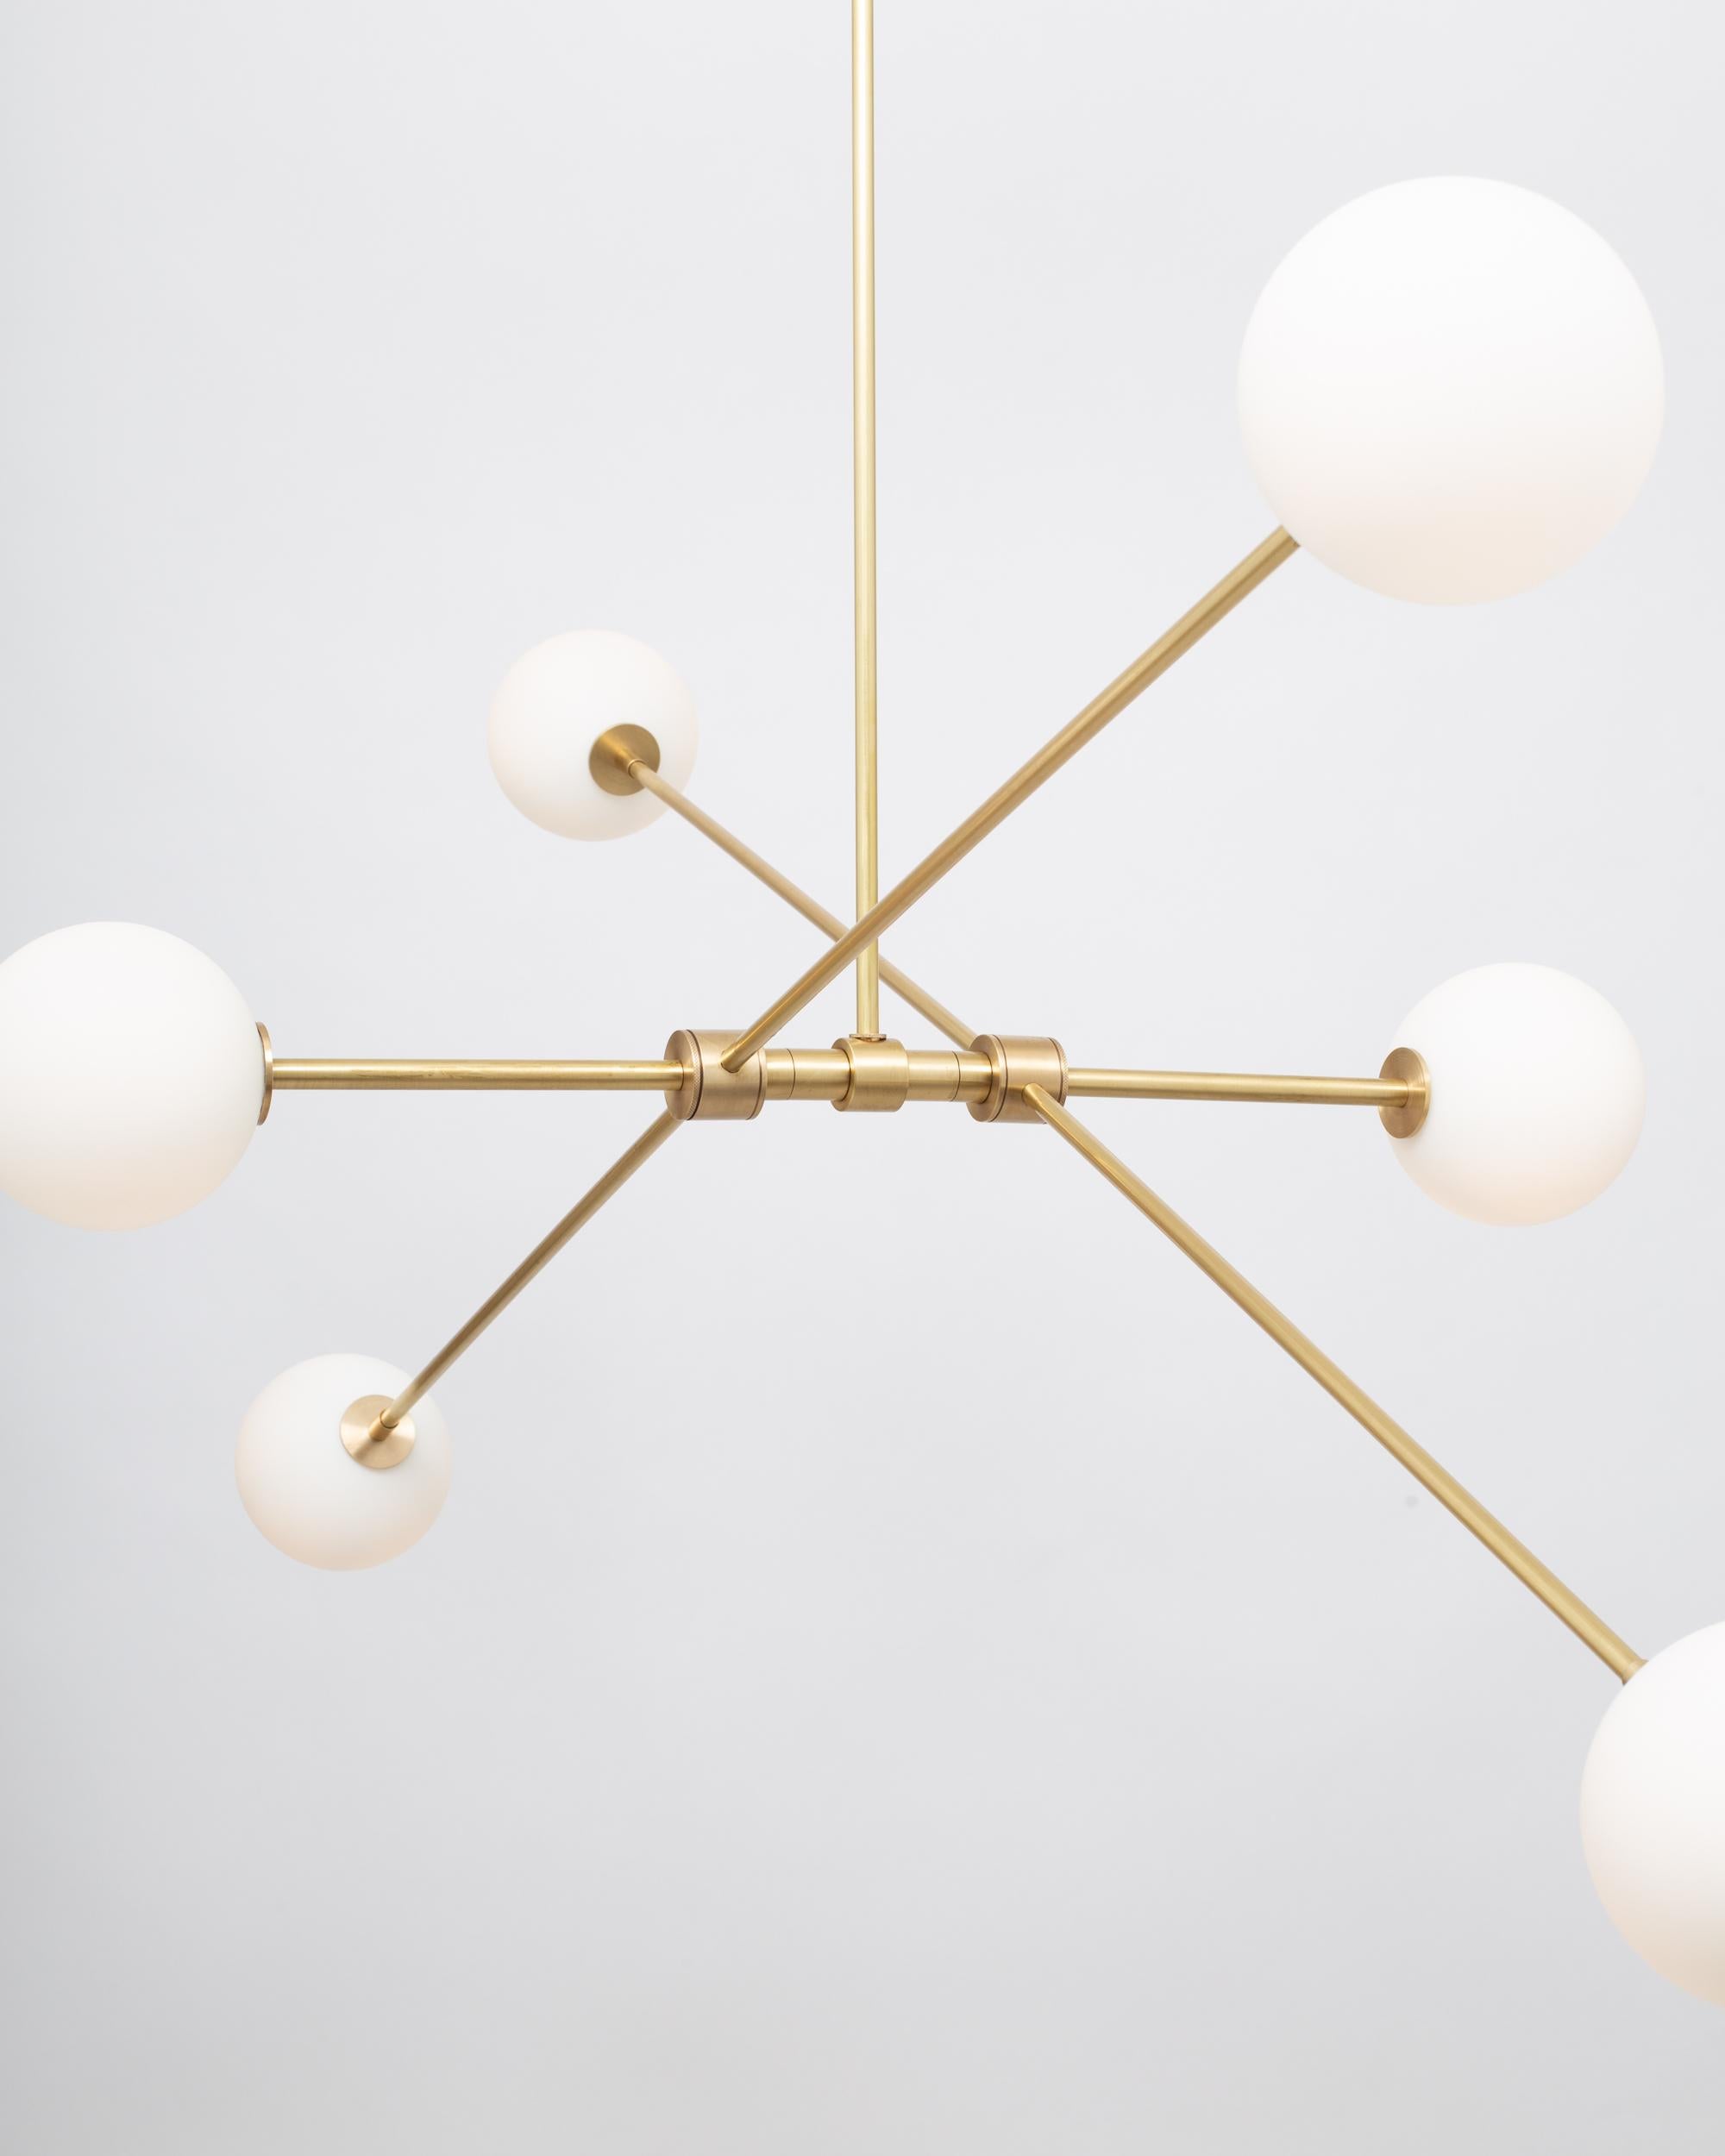 Lights of London design and hand produce contemporary lighting fixtures in the UK and ship worldwide.

Each fixture is individually handcrafted with great attention to detail using the highest quality materials and artisan manufacturing processes